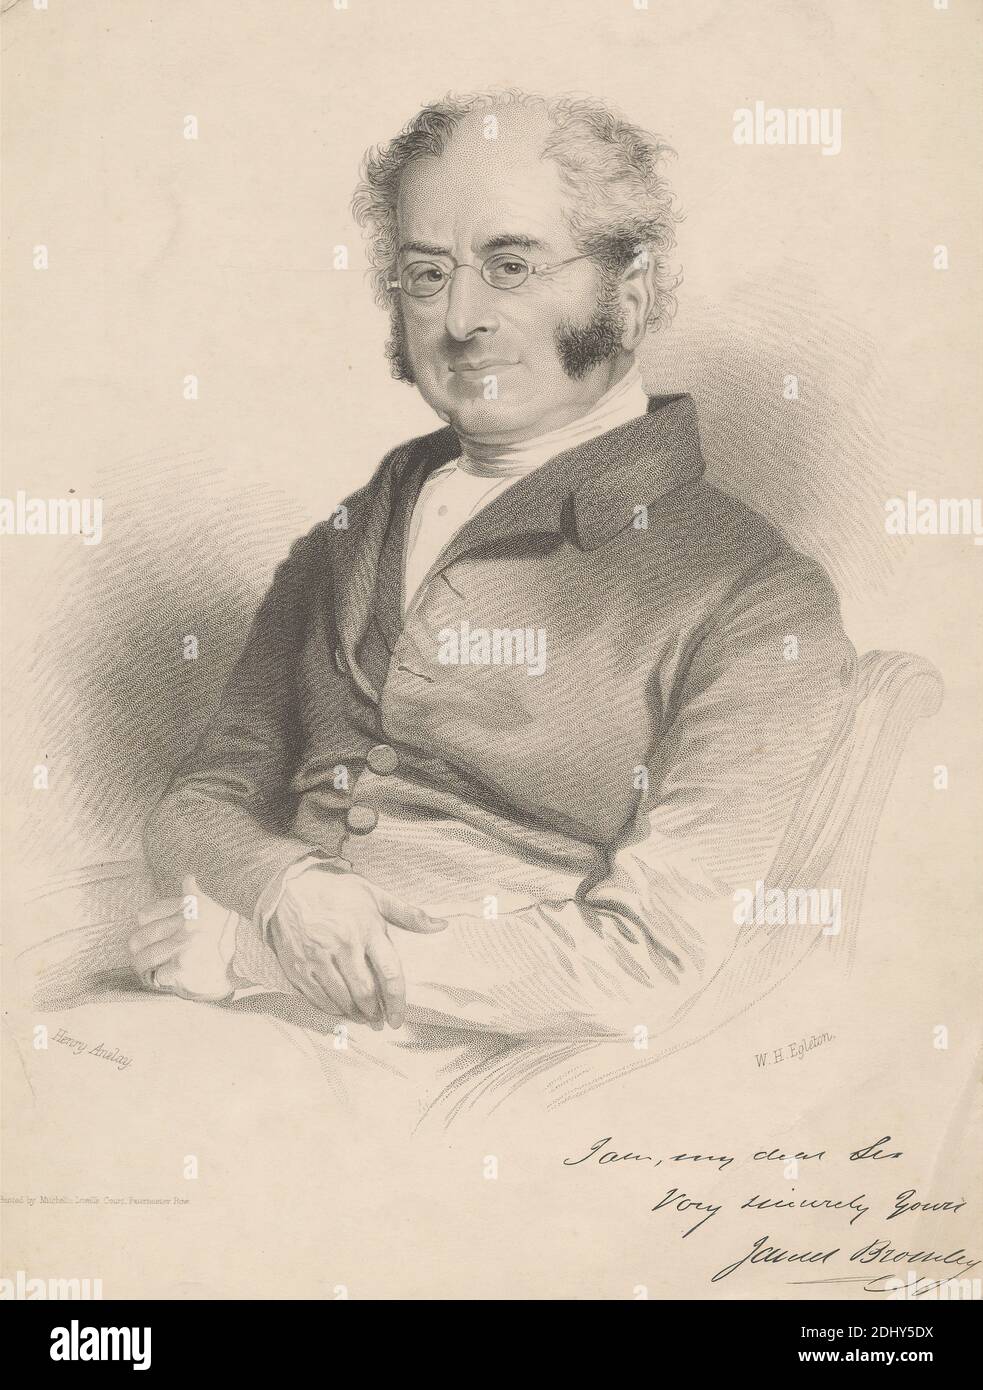 James Bromley, William H. Egleton, active 1833–1862, after Henry Anelay, active 1858–1873, British, Printed by John Mitchell, active 1832–died 1889, British, undated, Lithograph on moderately thick, smooth, beige wove paper, Sheet: 9 13/16 x 7 5/16 inches (24.9 x 18.6 cm) and Image: 7 13/16 x 7 1/16 inches (19.8 x 17.9 cm), artist, chair, coat, eyeglasses, man, portrait Stock Photo